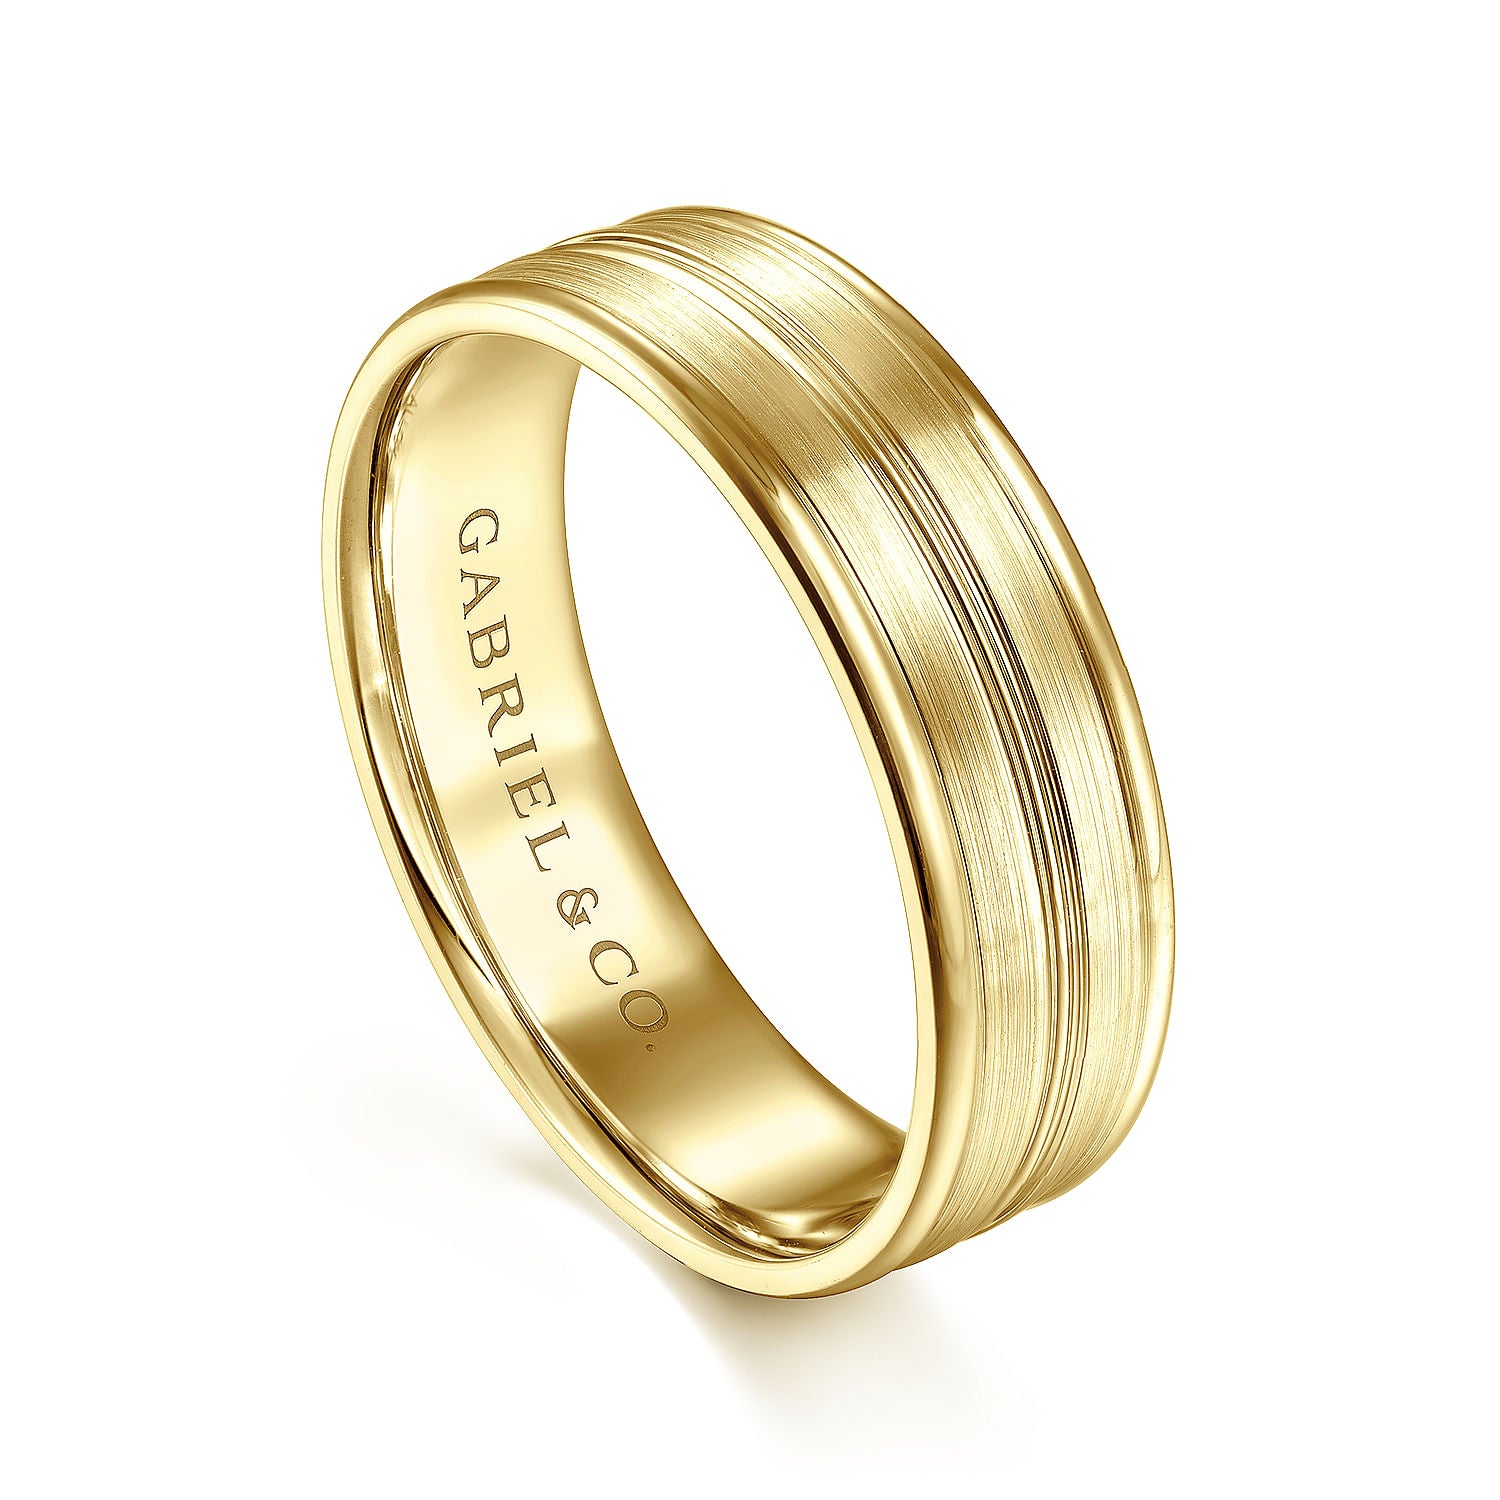 Gabriel & Co Yellow Gold Wedding Band With A Satin Finished Center And Polished Edges - Gold Wedding Bands - Men's